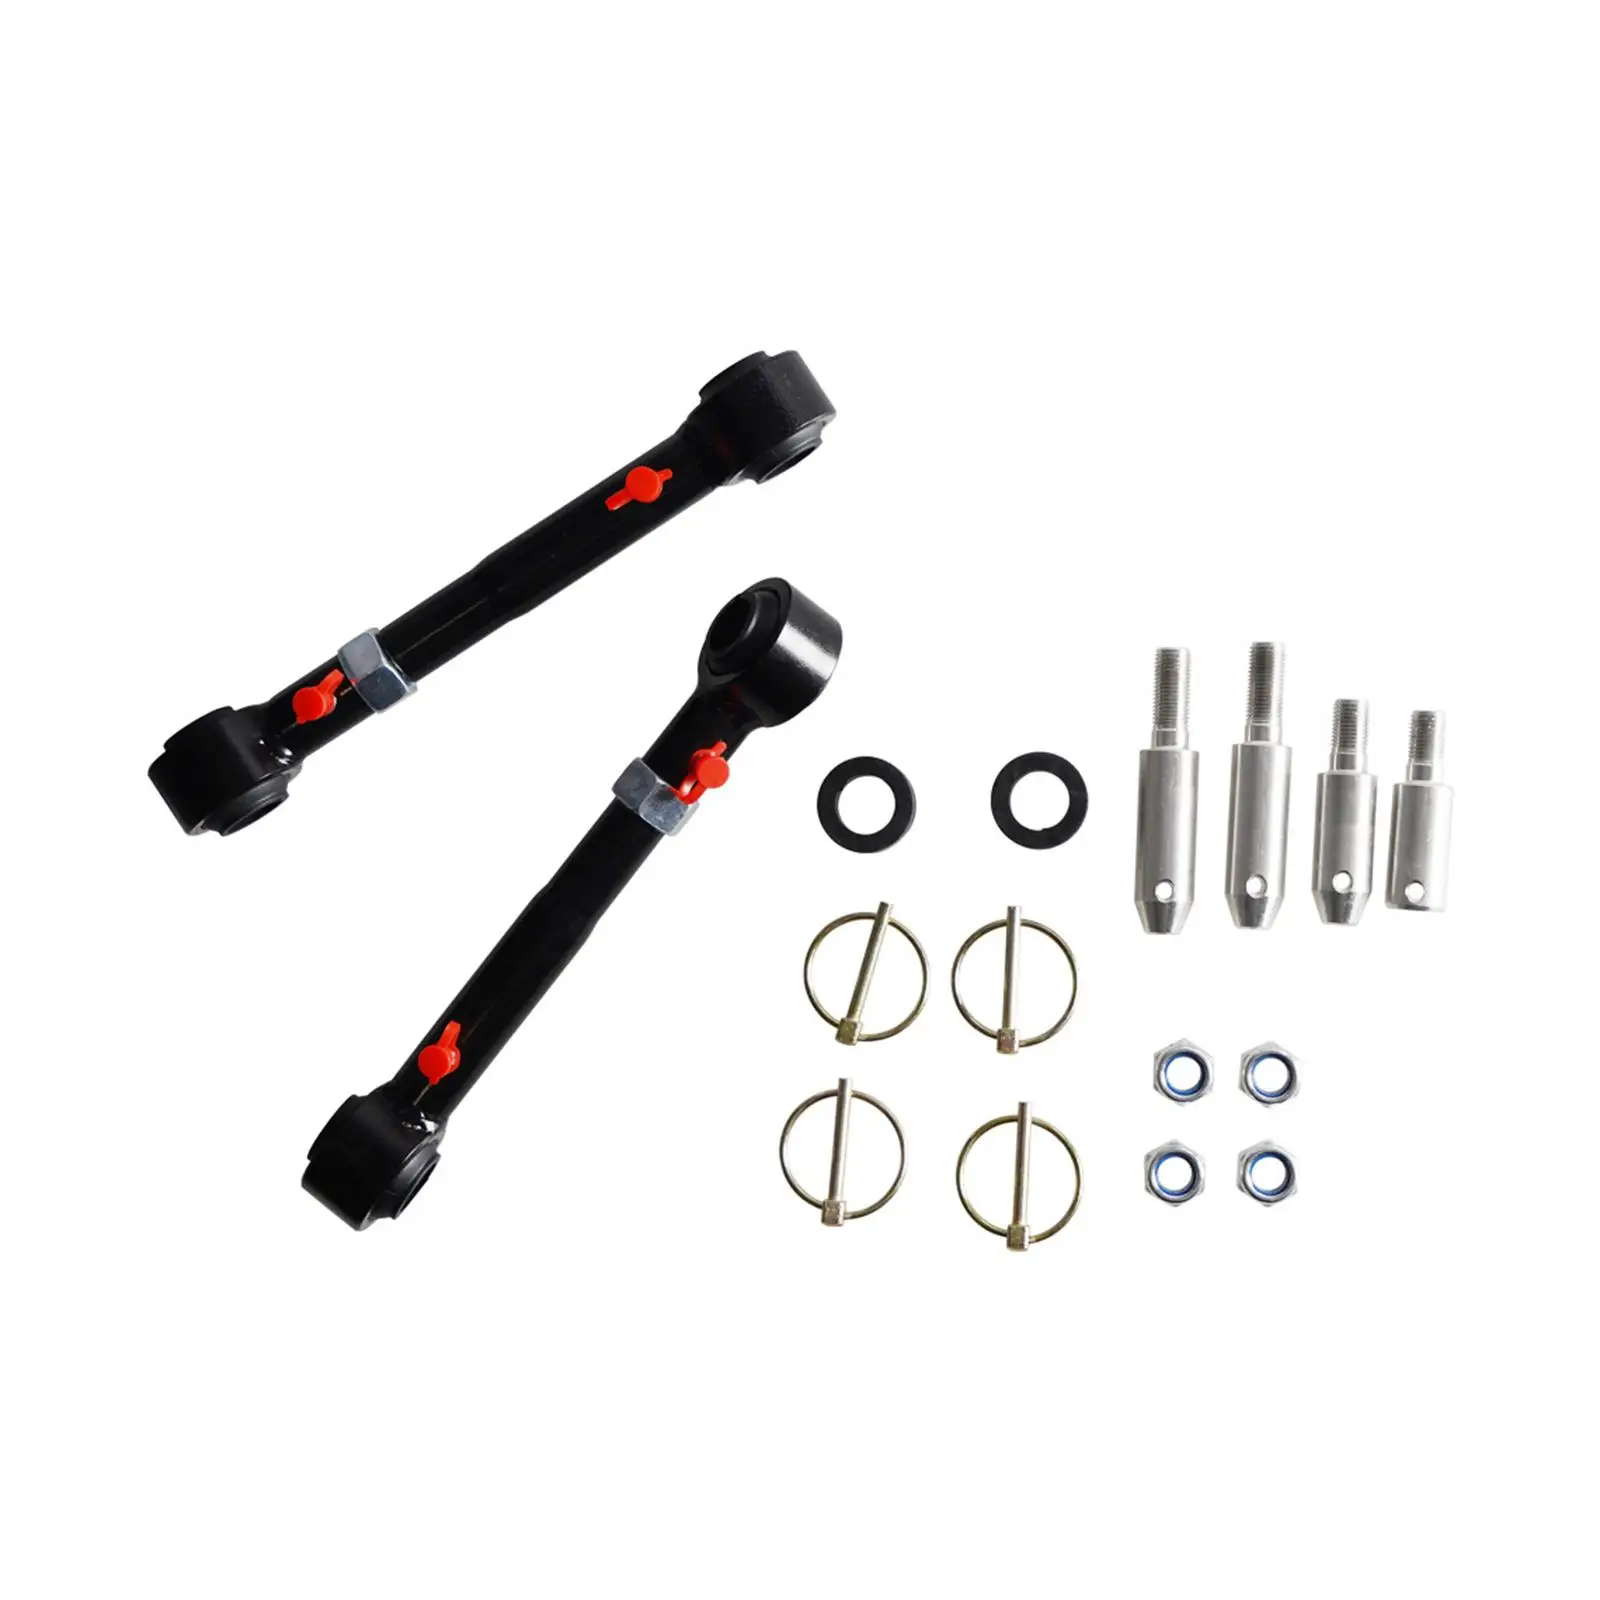 Adjustable Front Swaybar Professional Repair Parts Car Accessory Sway Bar Link Kit Front for Jeep Wrangler 2007-2018